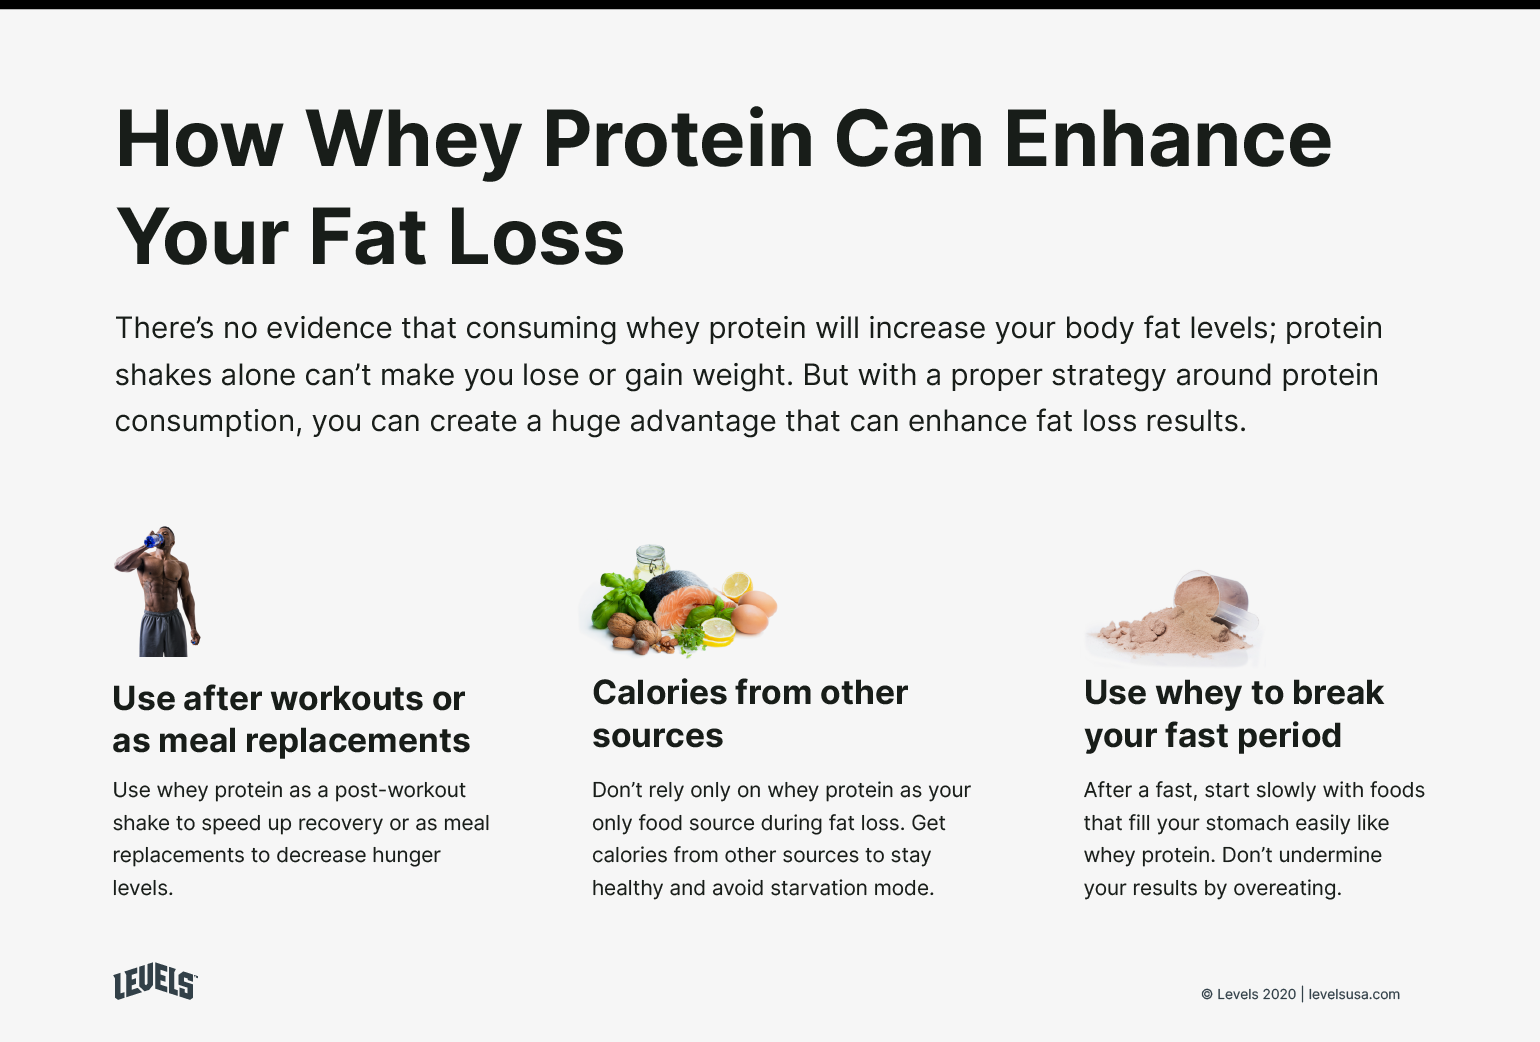 Can Whey Protein Make You Fat? - Infographic